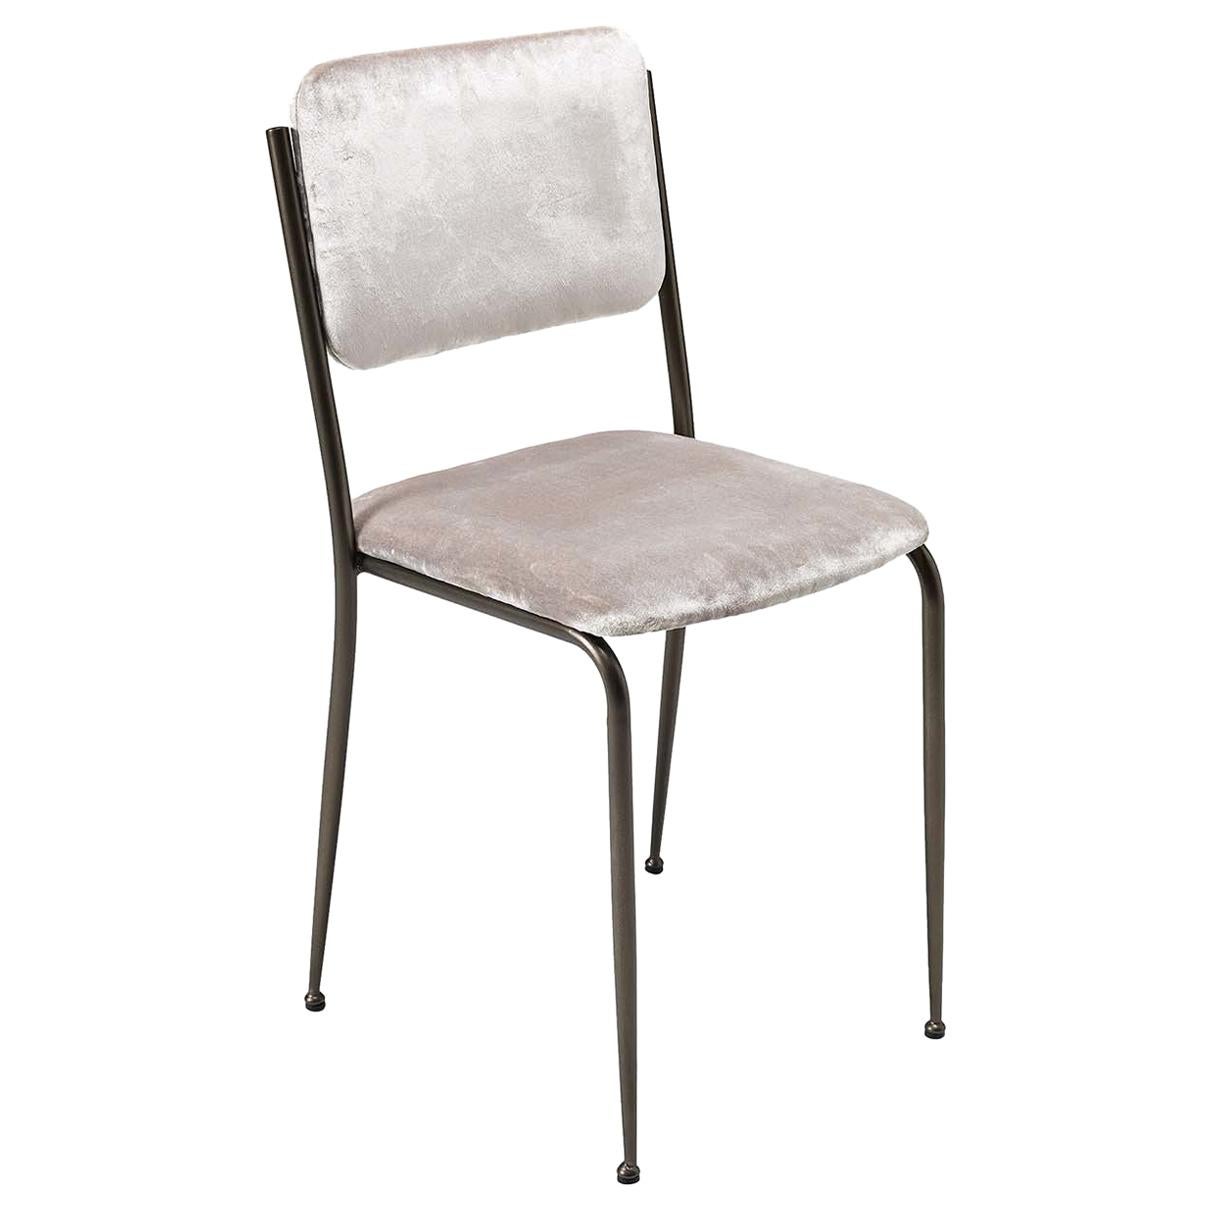 Miss Tina 3 Chair For Sale